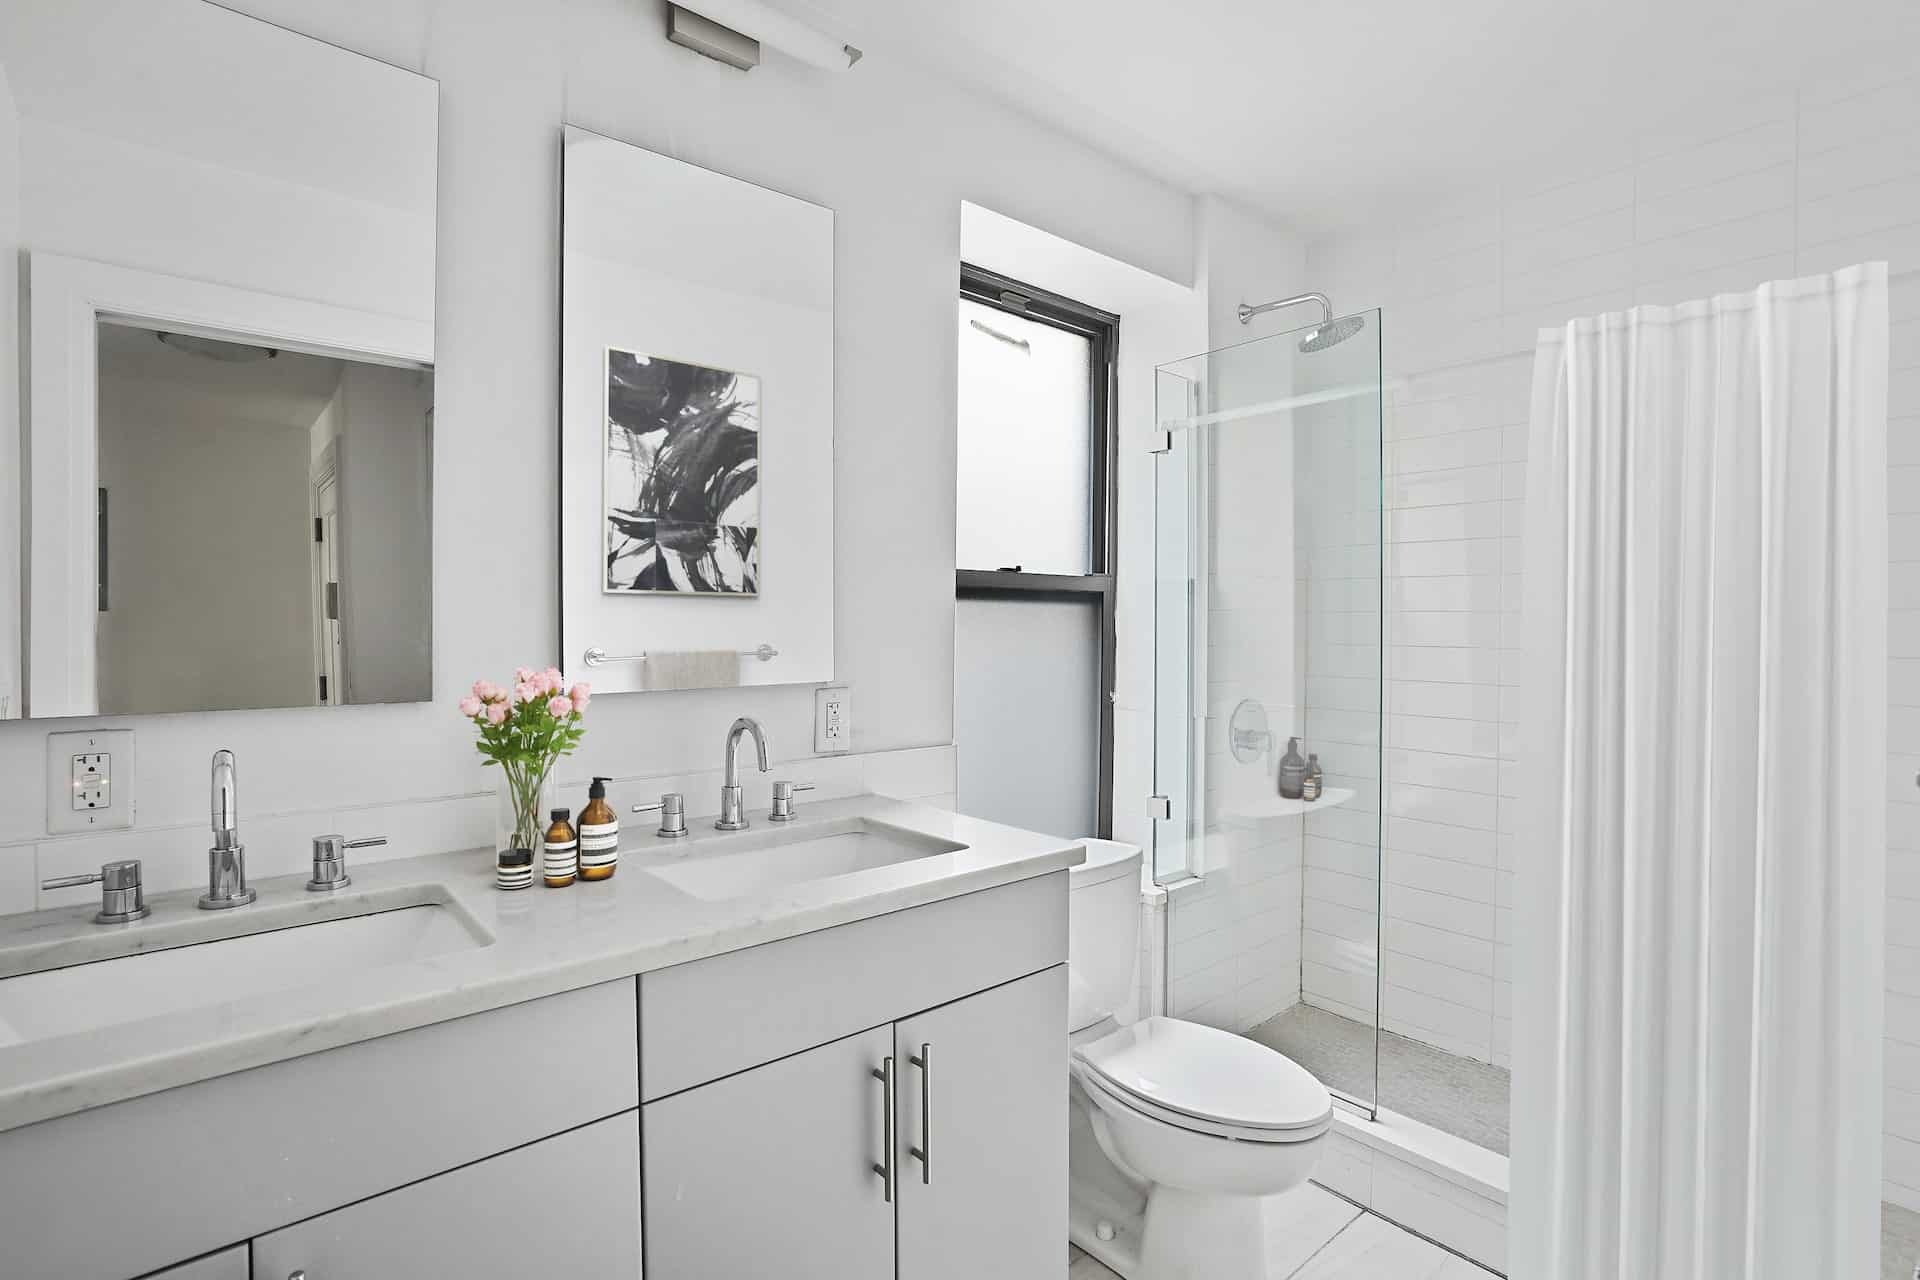 Bathroom at 556-566 West 126th Street apartments in New York with a double vanity, two square mirrors and a walk-in shower.